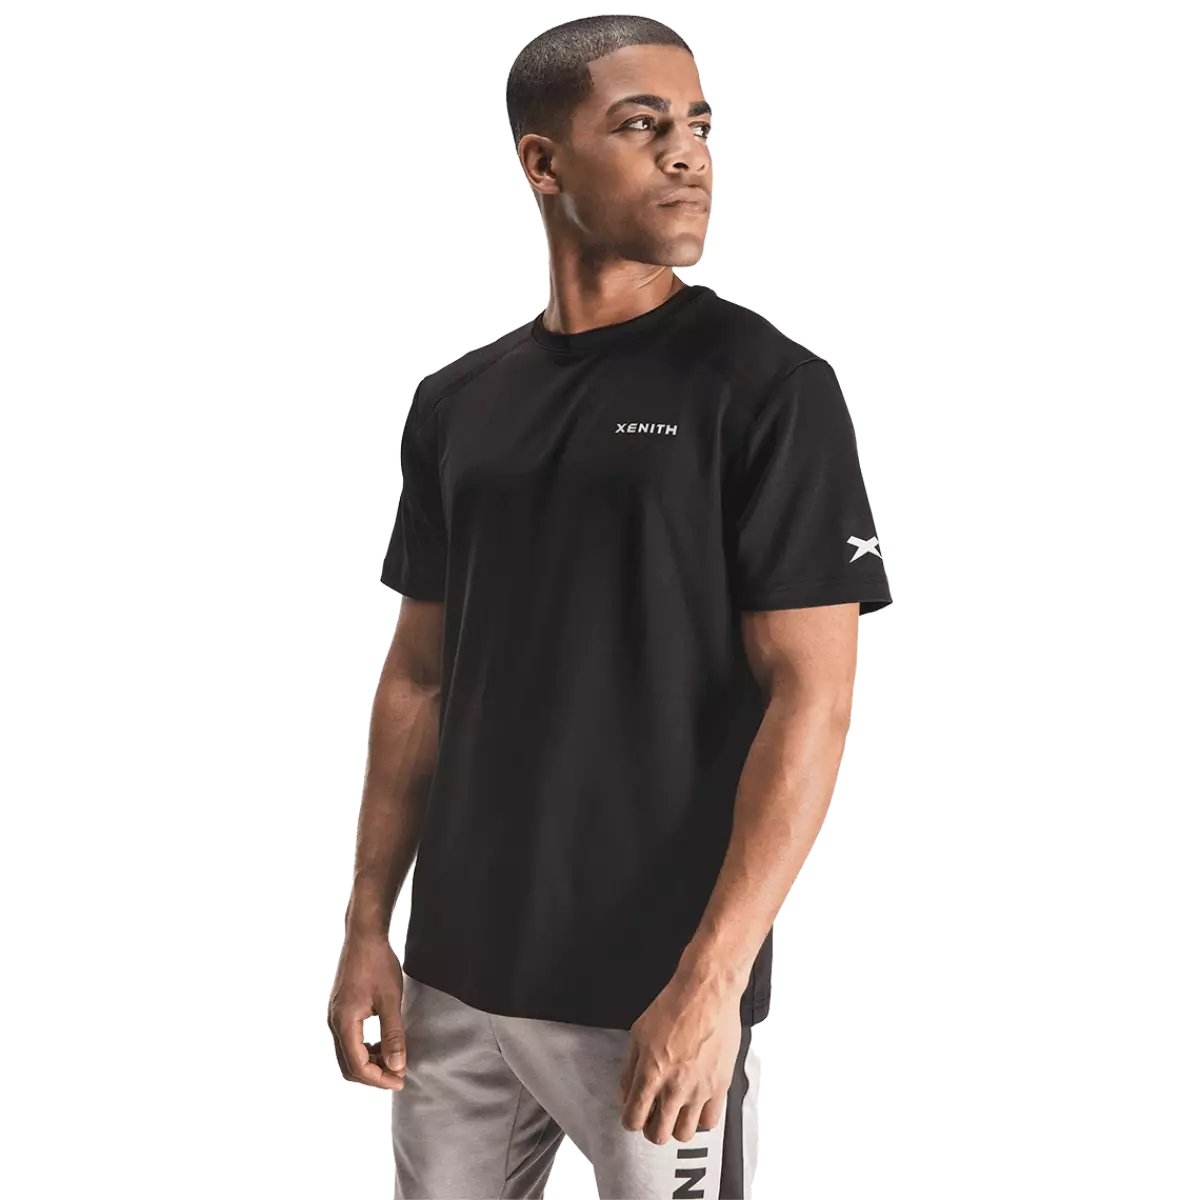 Male model wearing black t-shirt with white Xenith wordmark on left breast.